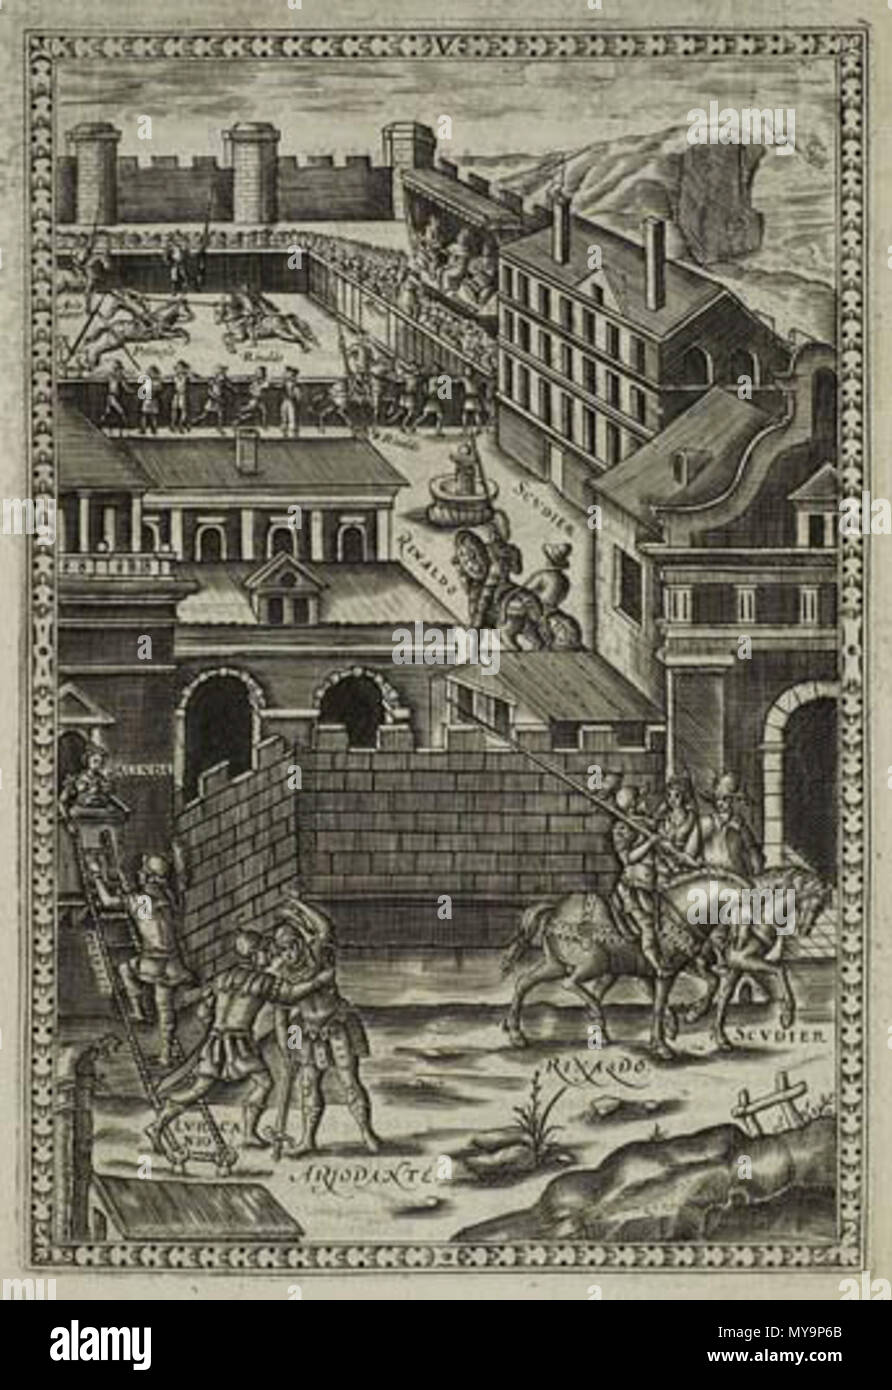 . English: Ludovico Ariosto, Orlando Furioso, 1634 - Ariodante and Dalinda, illustration pl.V, p.31. The tale of Ariodante, and Ginevra impersonated by Dalinda is the subject of a fine engraving in the 1634 edition of Harington's translation of Orlando Furioso. This plate shows several scenes from the story that Shakespeare used, including in the foreground, the deception of Ariodante when he is made to believe that his love, Ginevra, has welcomed another lover at night. 24 July 2012. Ludovico Ariosto, Orlando Furioso in English heroical verse by Sir John Harington now thirdly revised , London Stock Photo